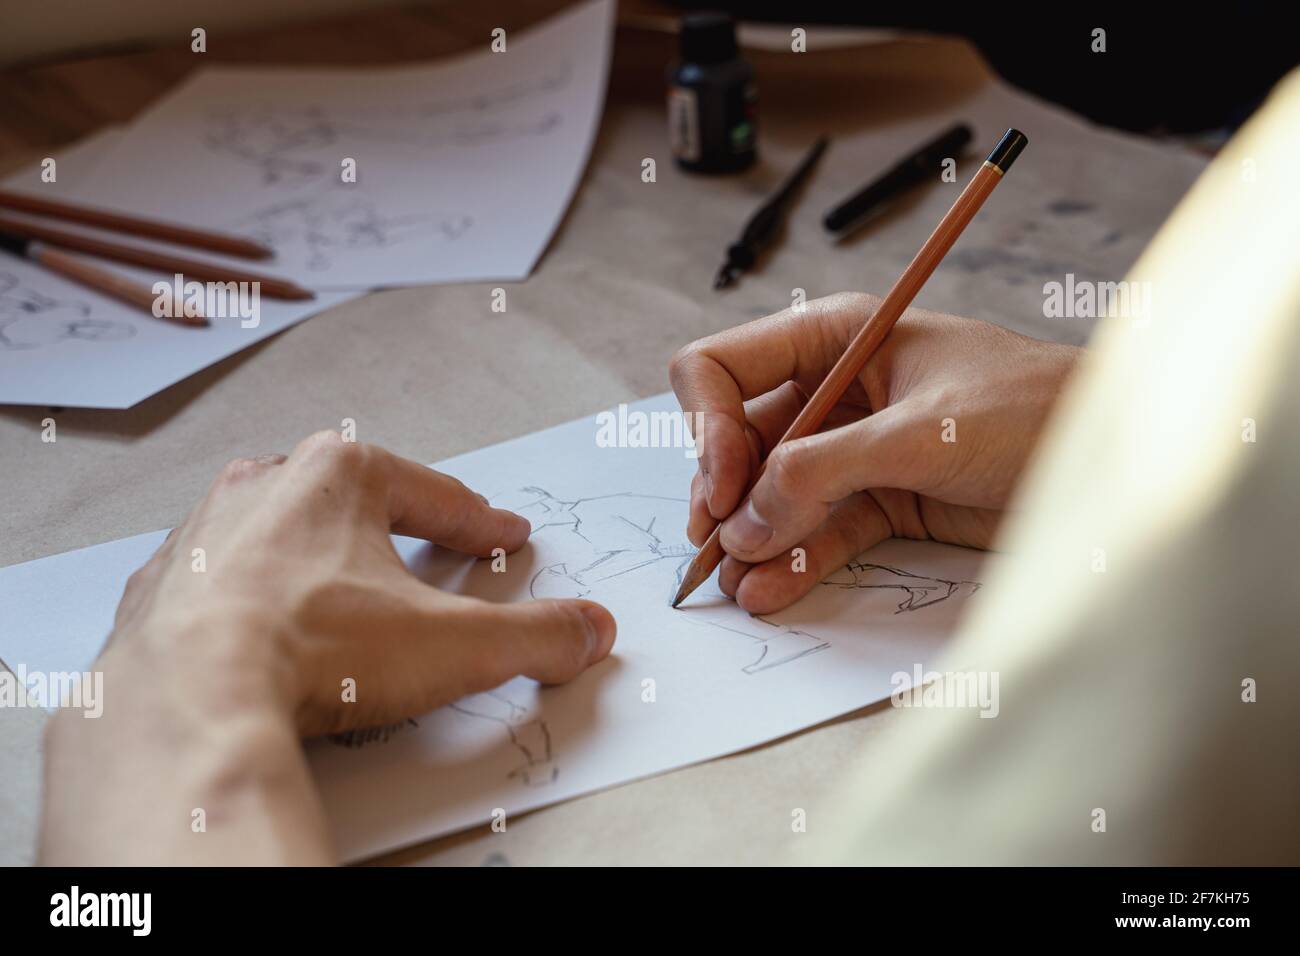 Artist drawing figure pencil sketches. Artwork background Stock Photo